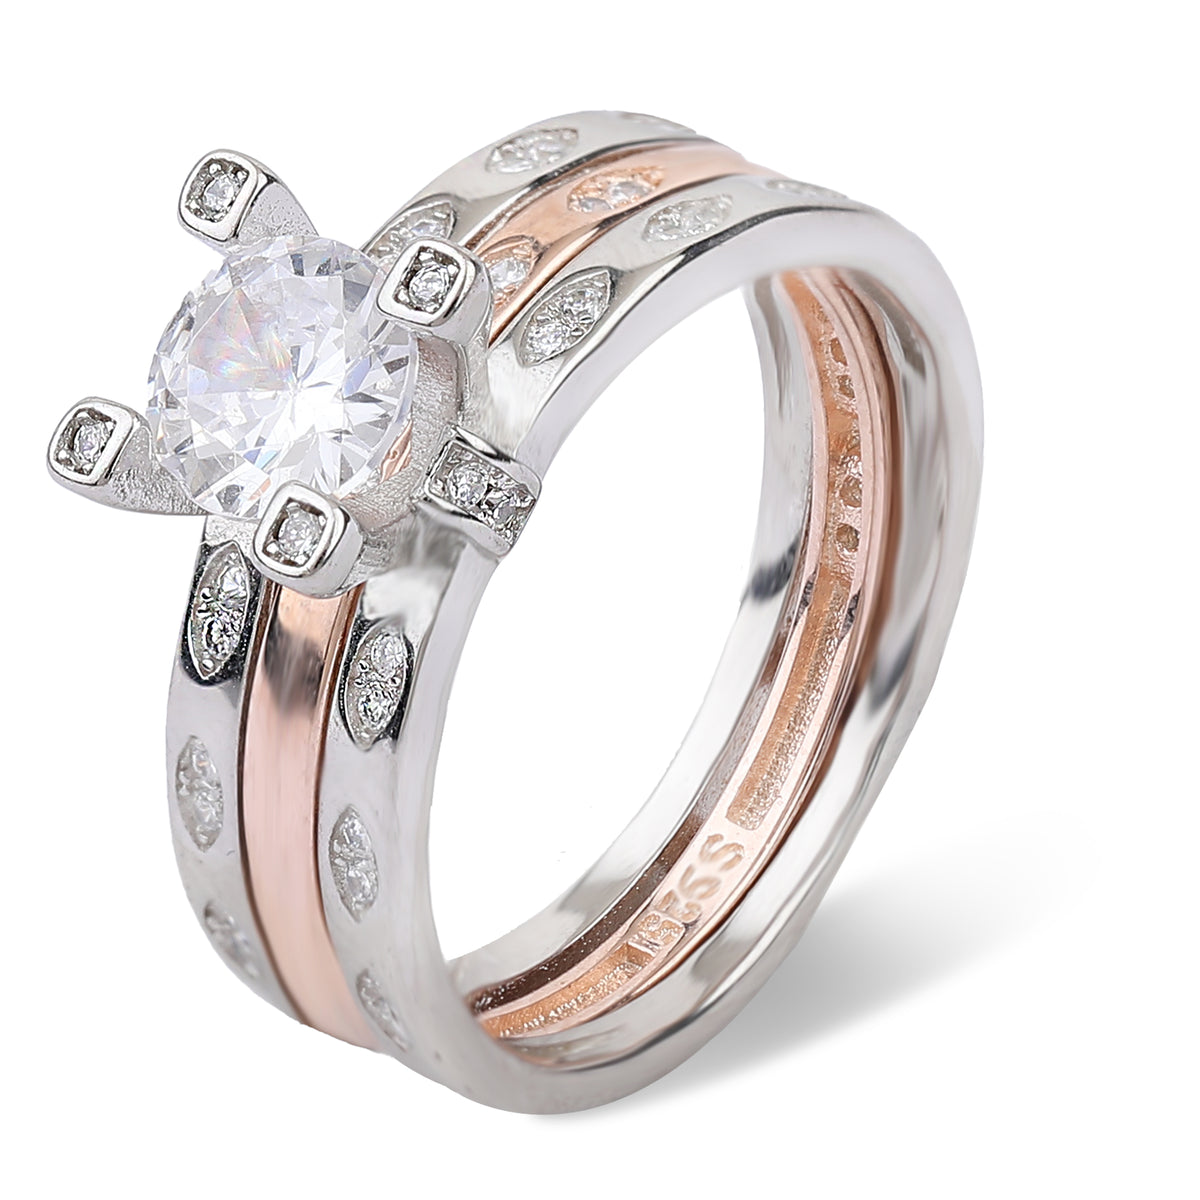 Two In One Creative Combination Silver Diamond Ring